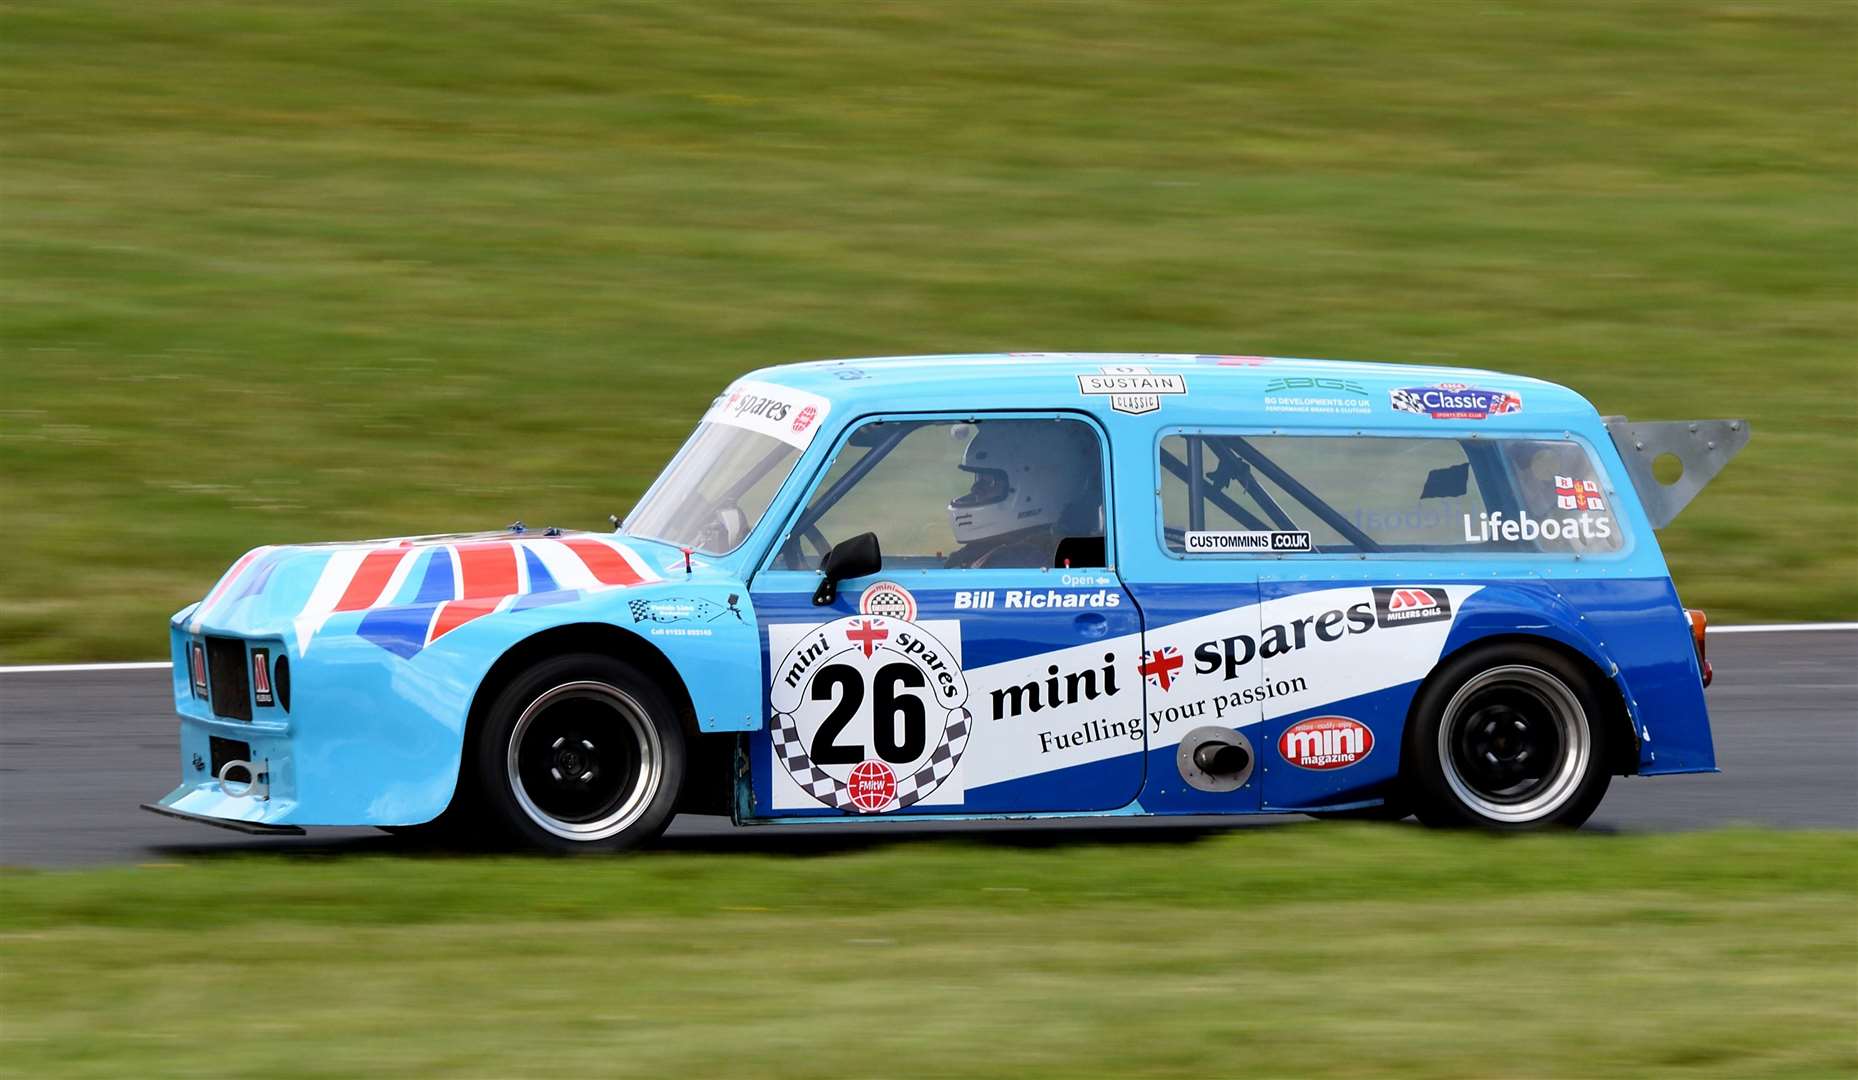 The Mini Spares-backed driver at speed in his Maguire Mini Traveller. Picture: Simon Hildrew